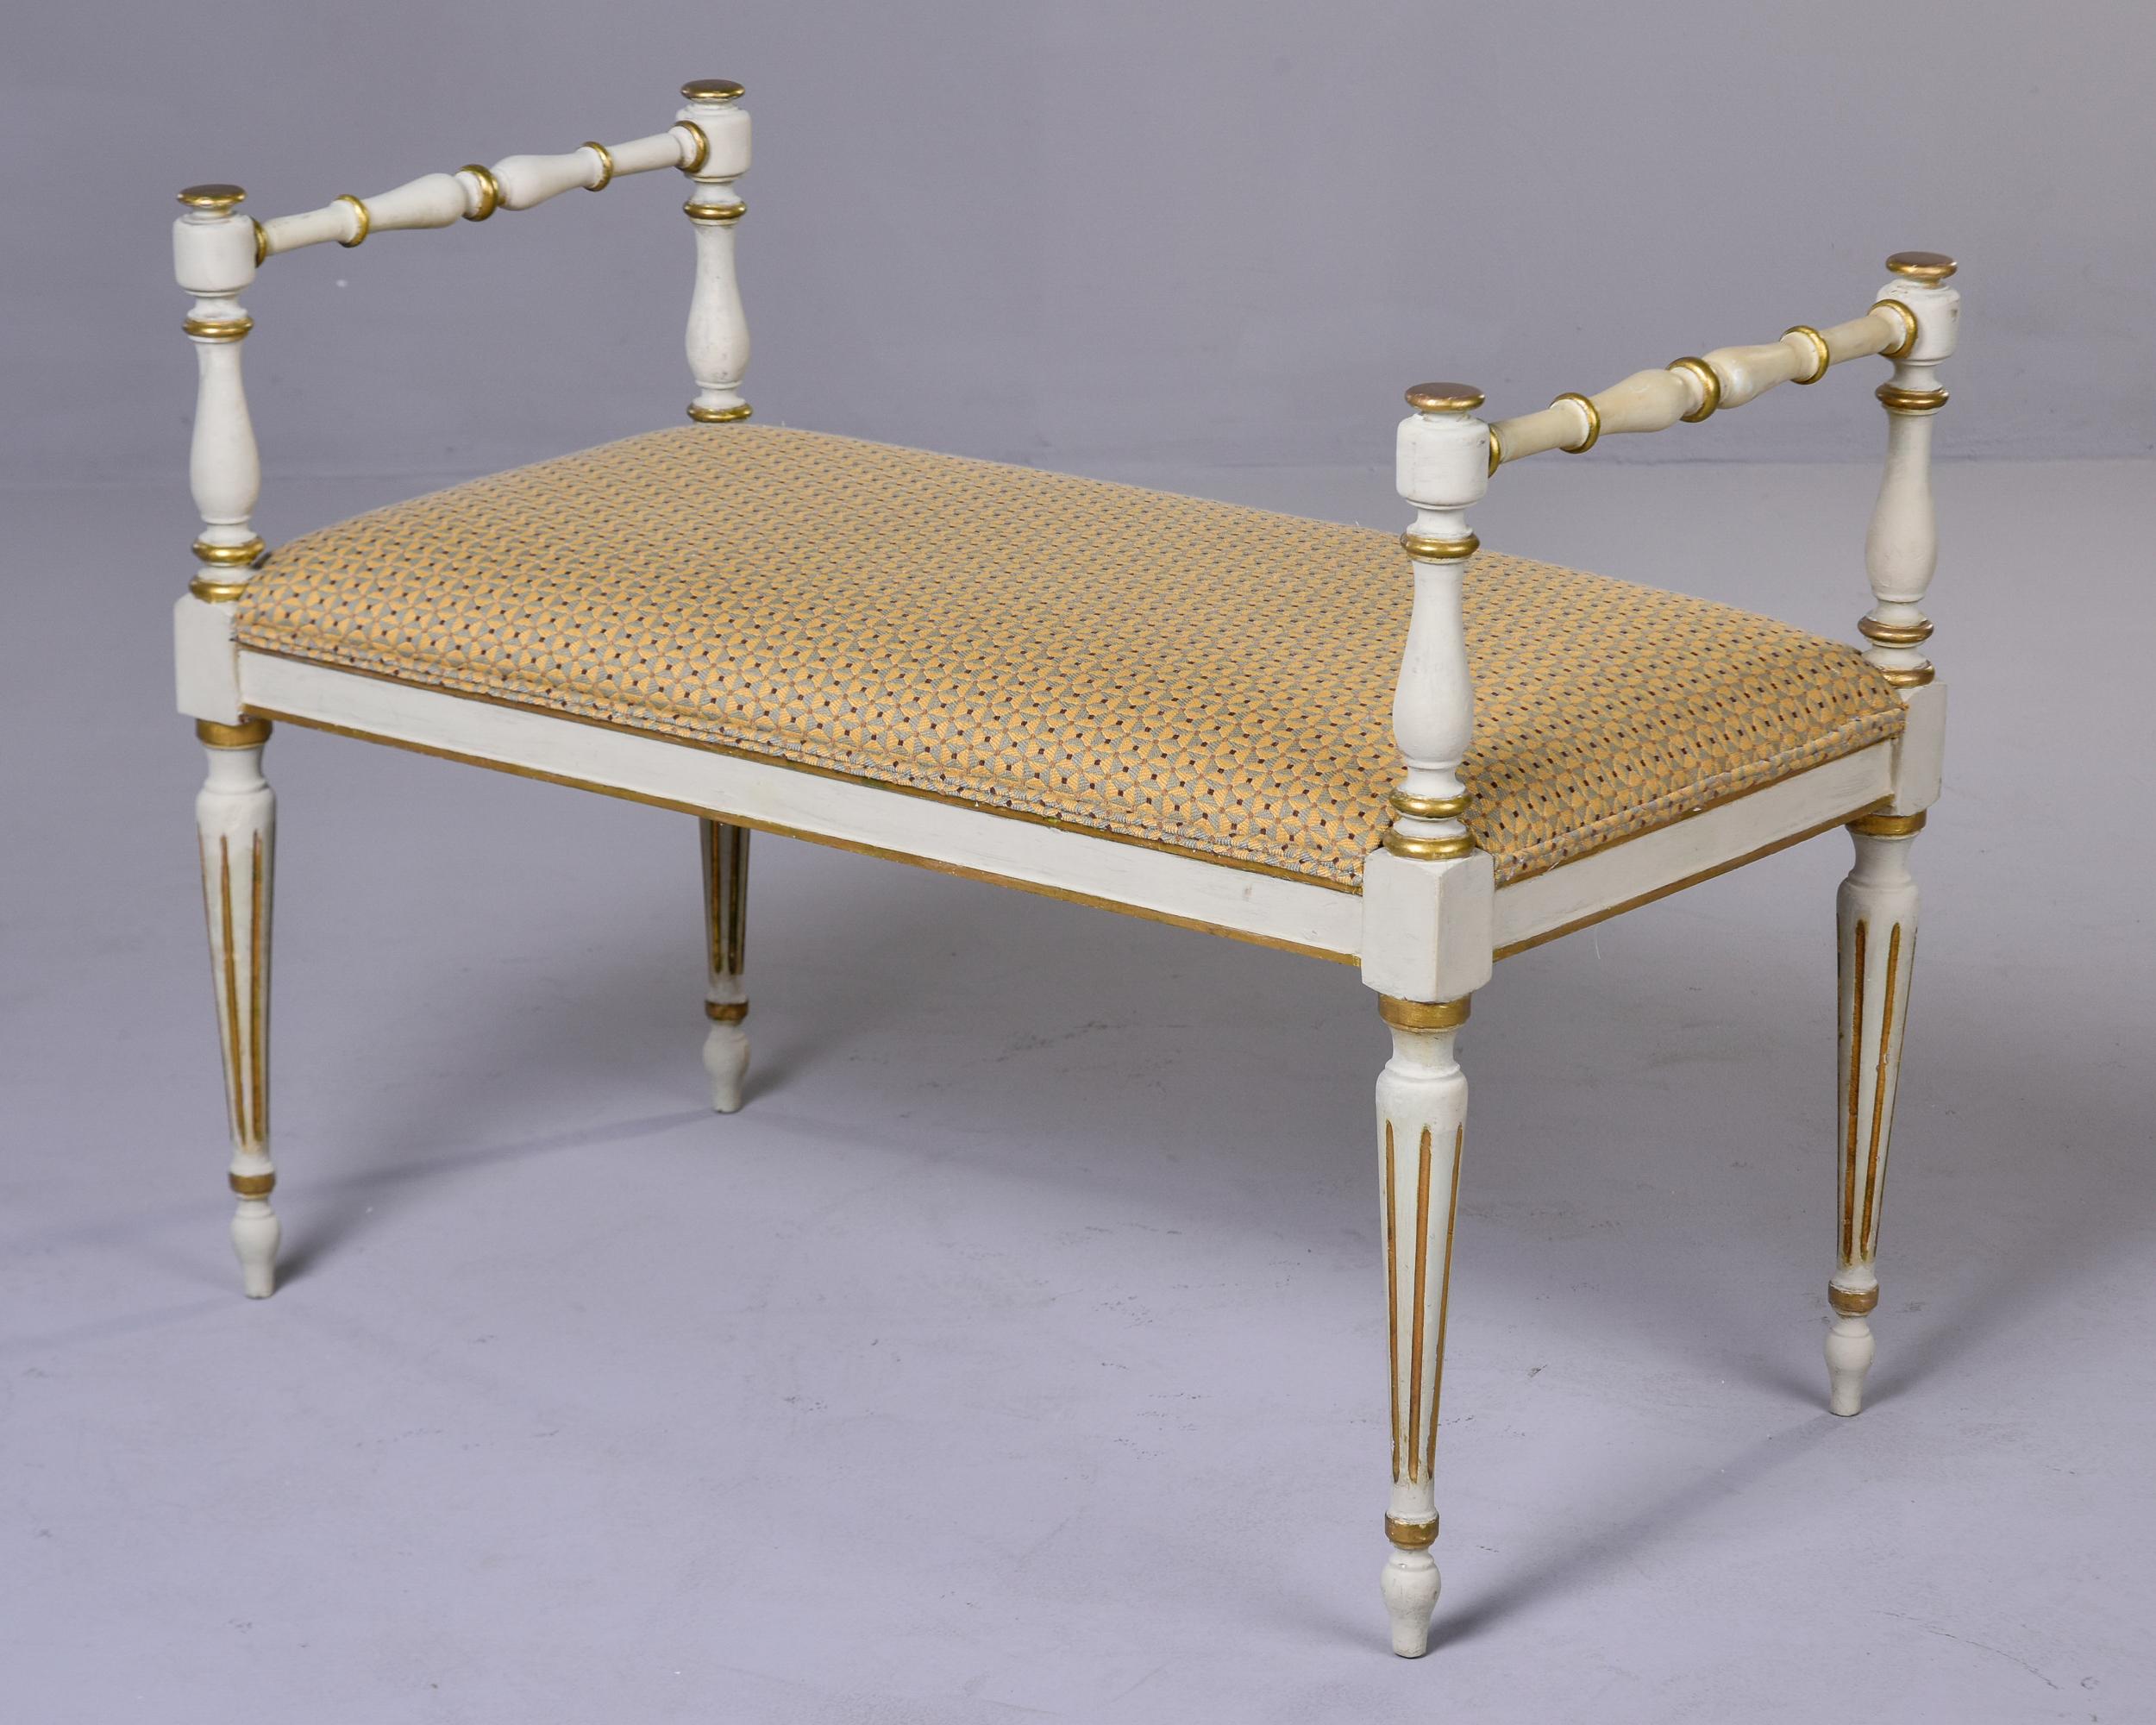 20th Century Early 20th C French Painted and Upholstered Bench with Side Arms  For Sale